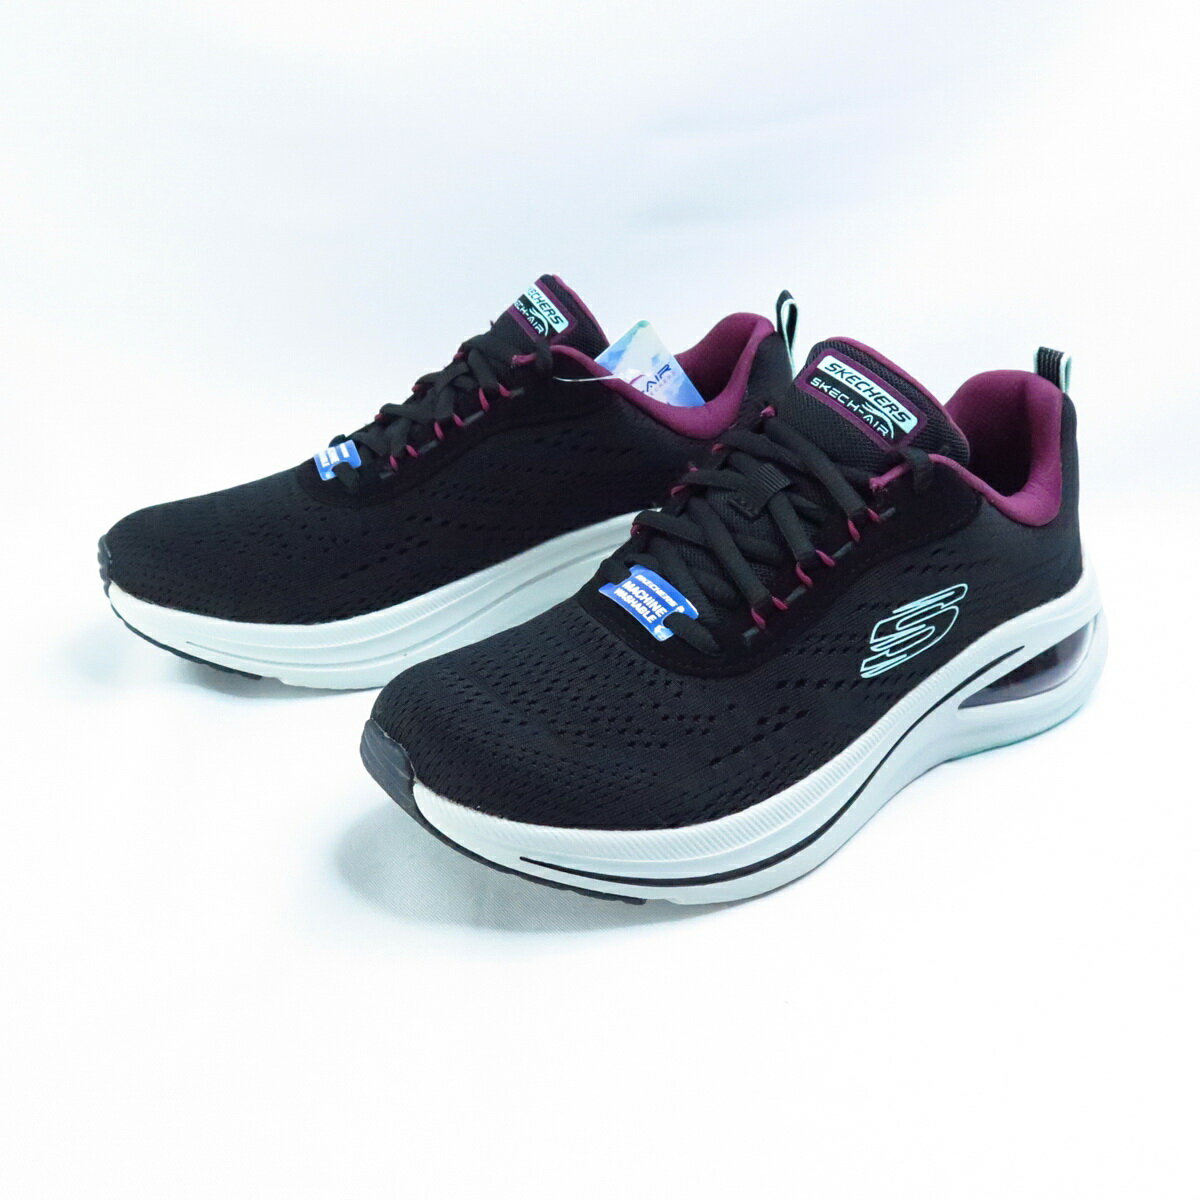 Skechers 150131BKMT 女款休閒鞋 SKECH-AIR META-AIRED OUT 黑x葡萄紫